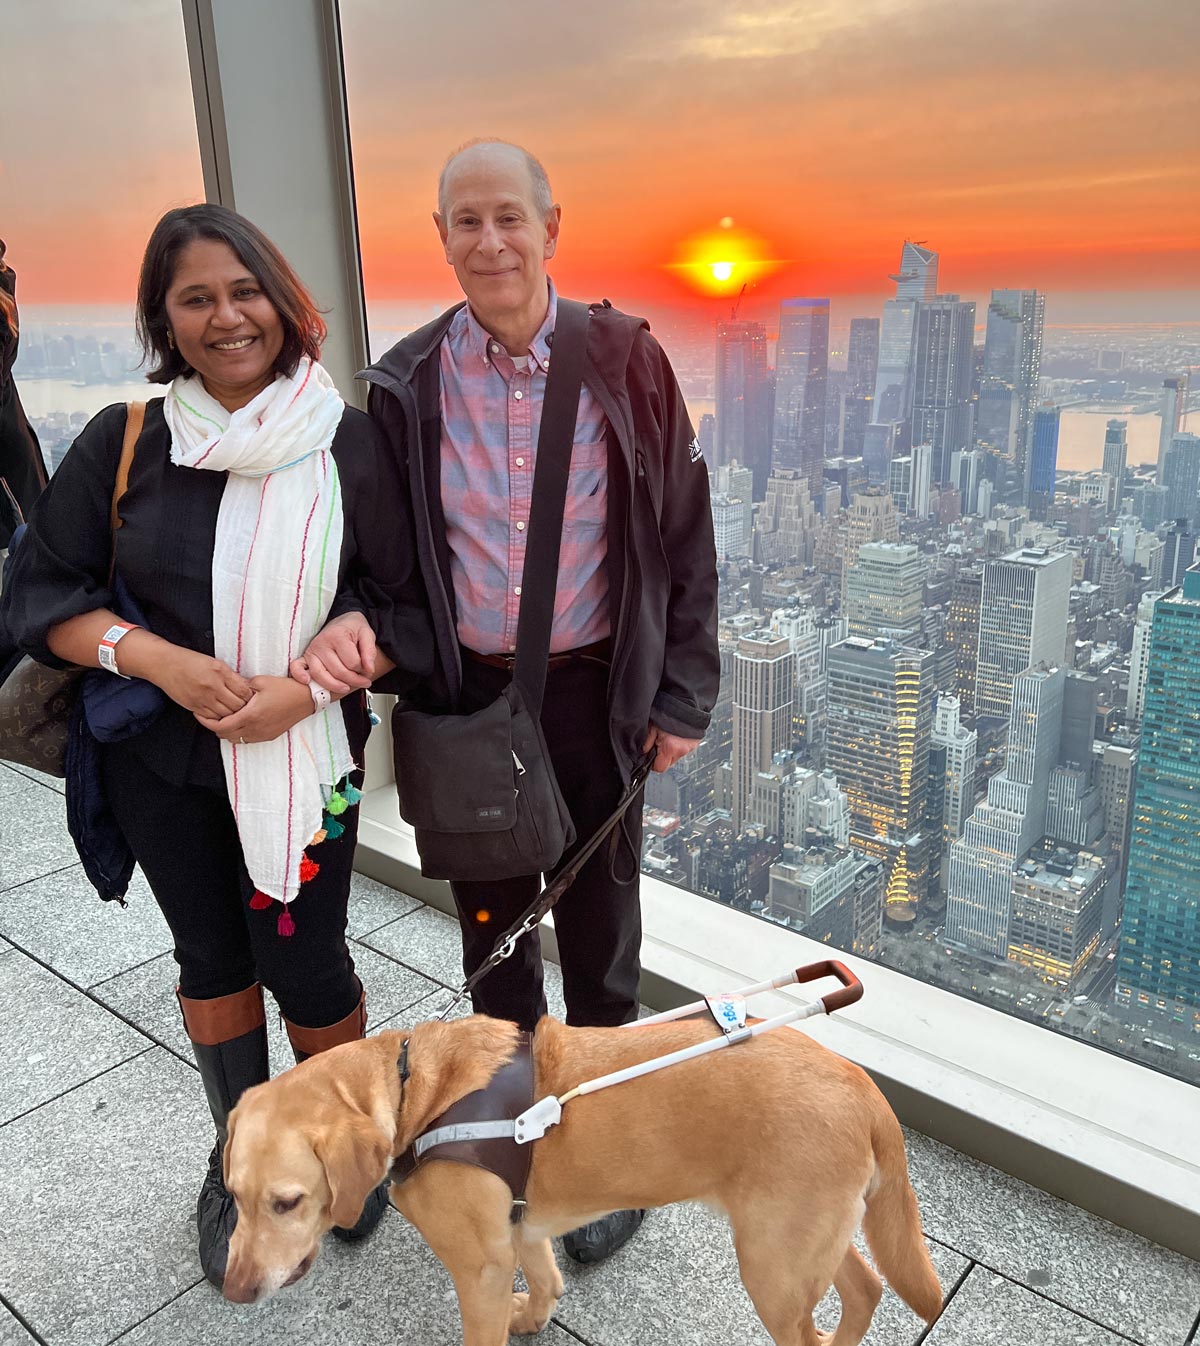 Lakshmee Lachhman-Persad and Peter Slatin along with Peter's guide dog Inga at the Summit One Vanderbilt with the sun setting over the stunning backdrop of manhattan's skyline.